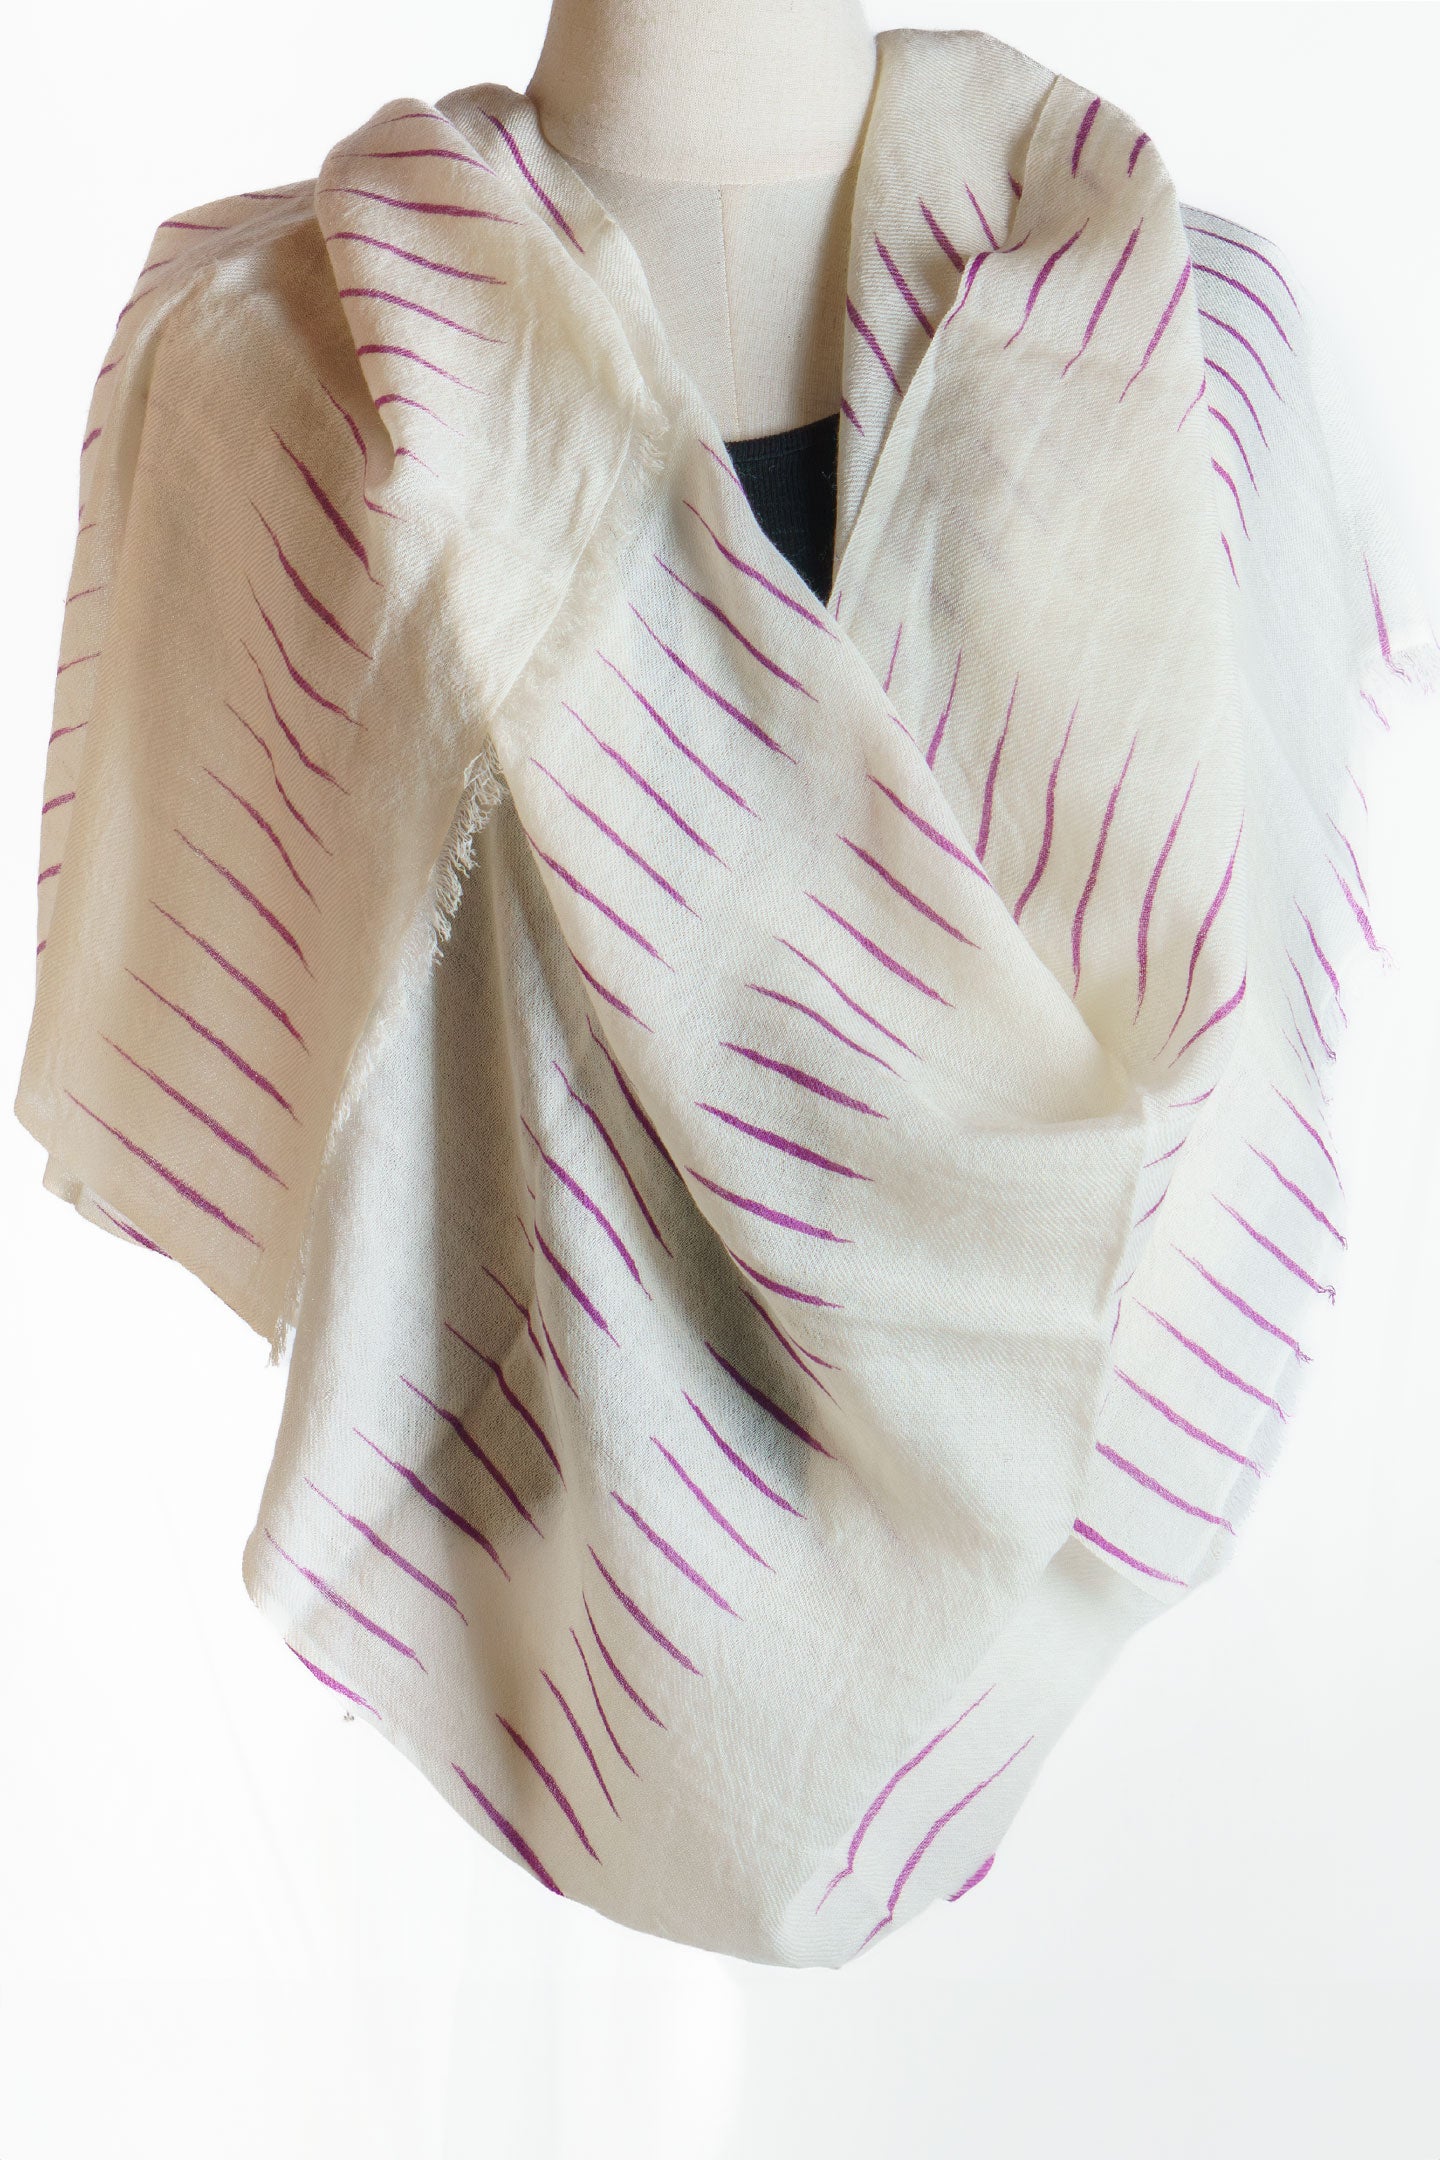 Hand Made Cashmere Scarf in Cream with Crimson